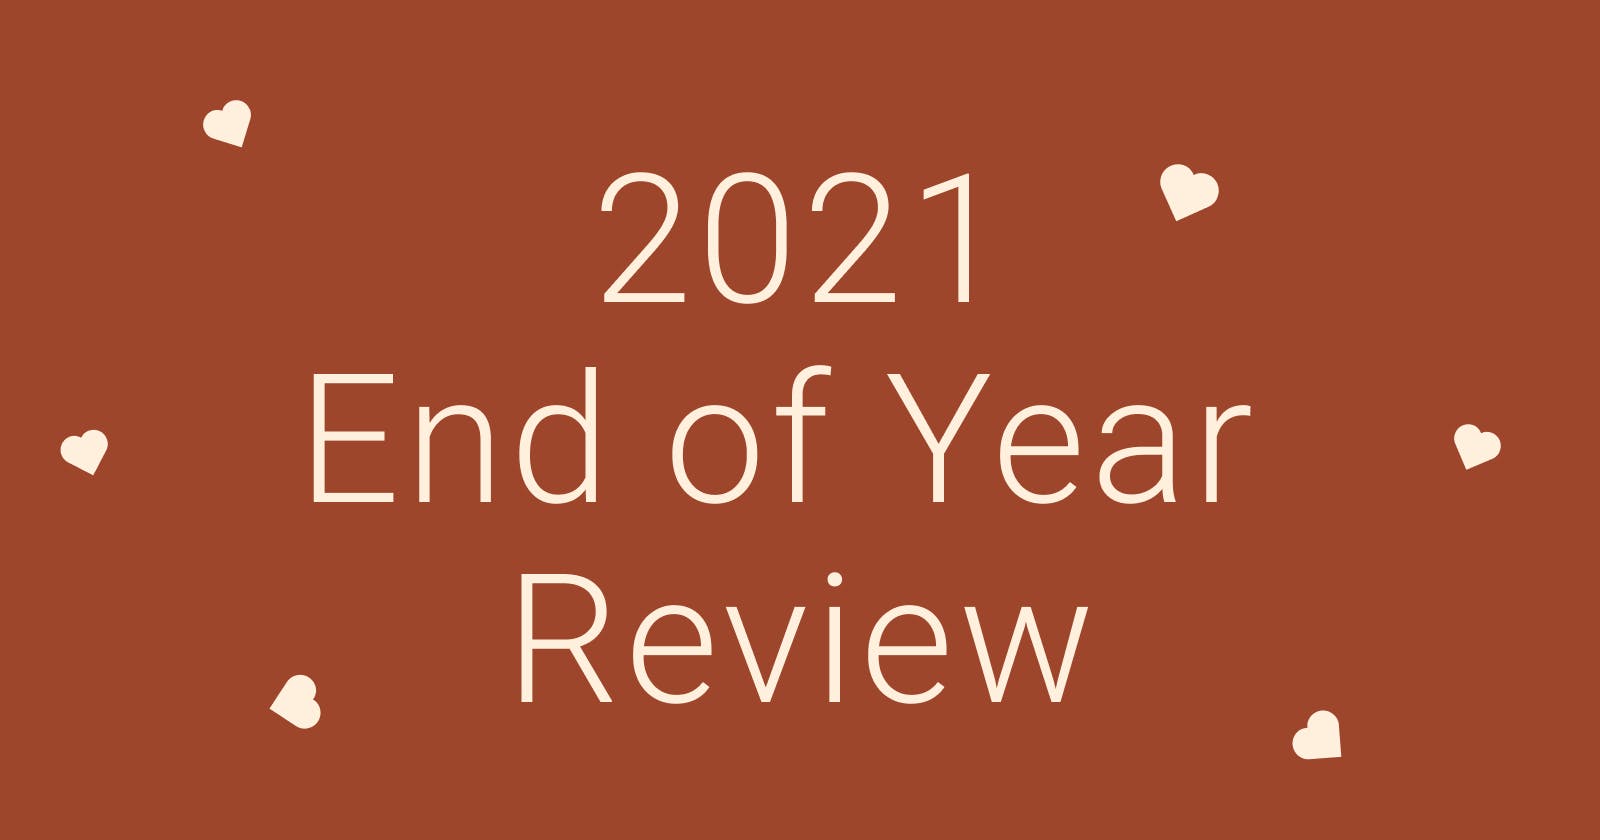 Our Start-up's End of Year Review